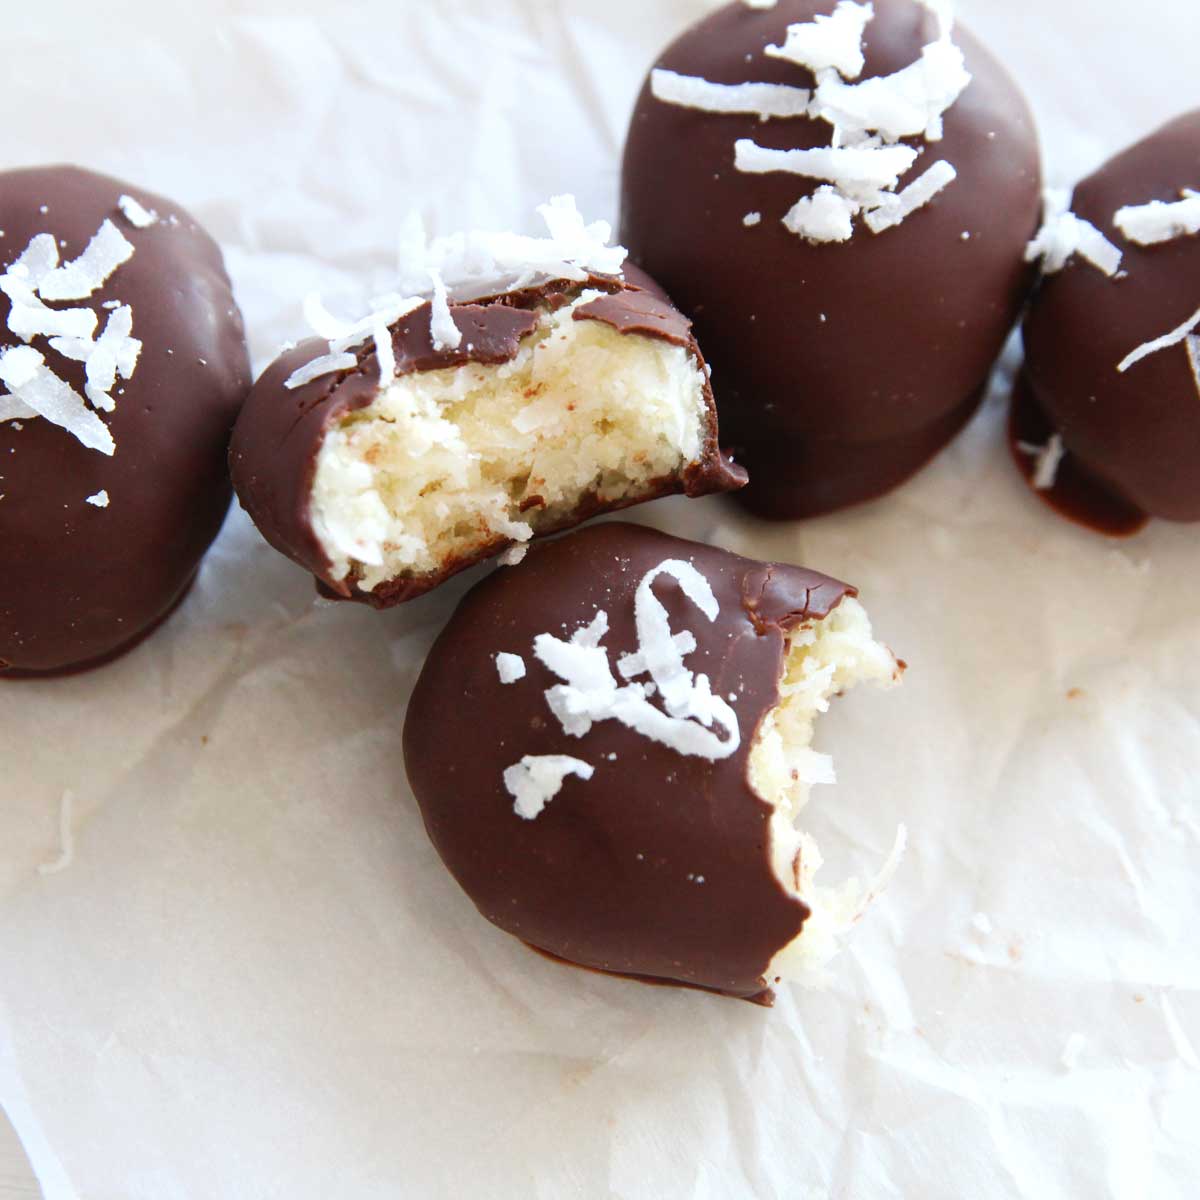 Chocolate Coconut Easter Eggs Made with Collagen Protein Powder - Chocolate Coconut Easter Eggs